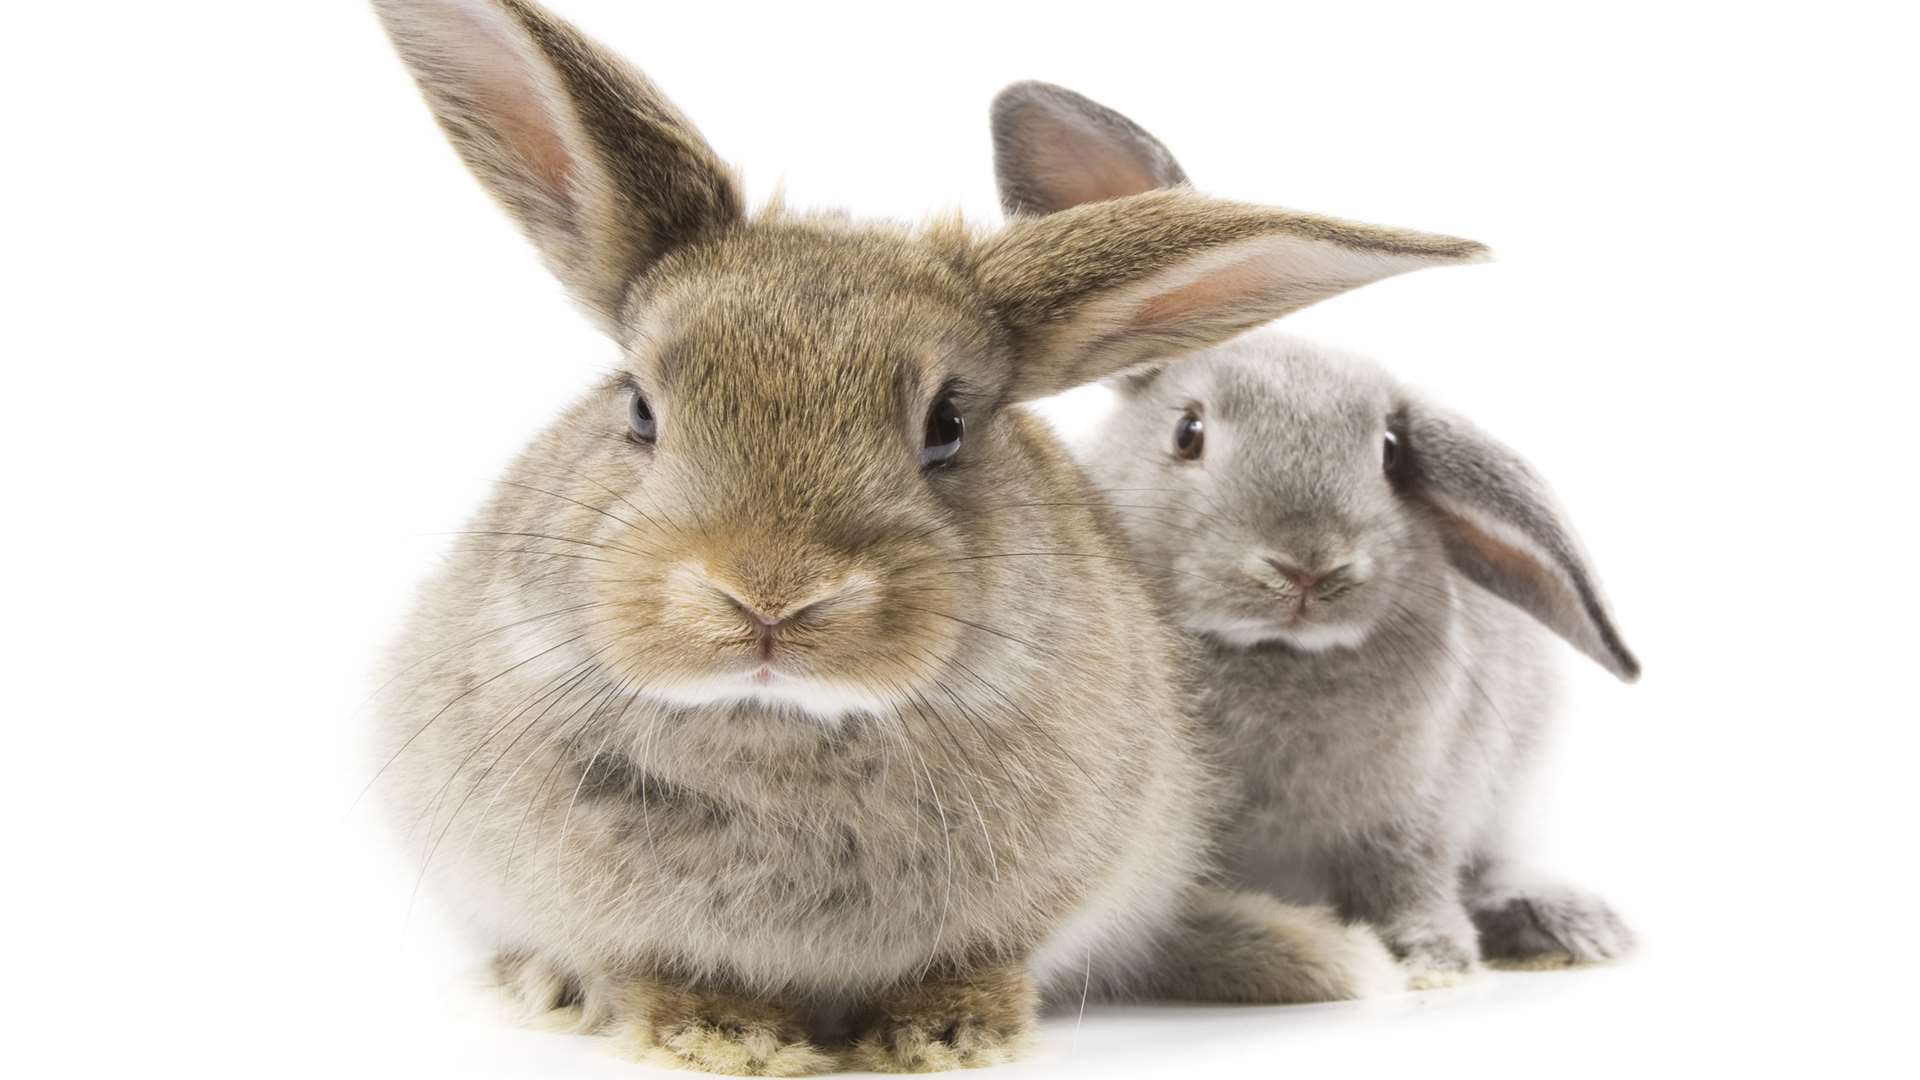 Rabbit owners have been warned about myxomatosis